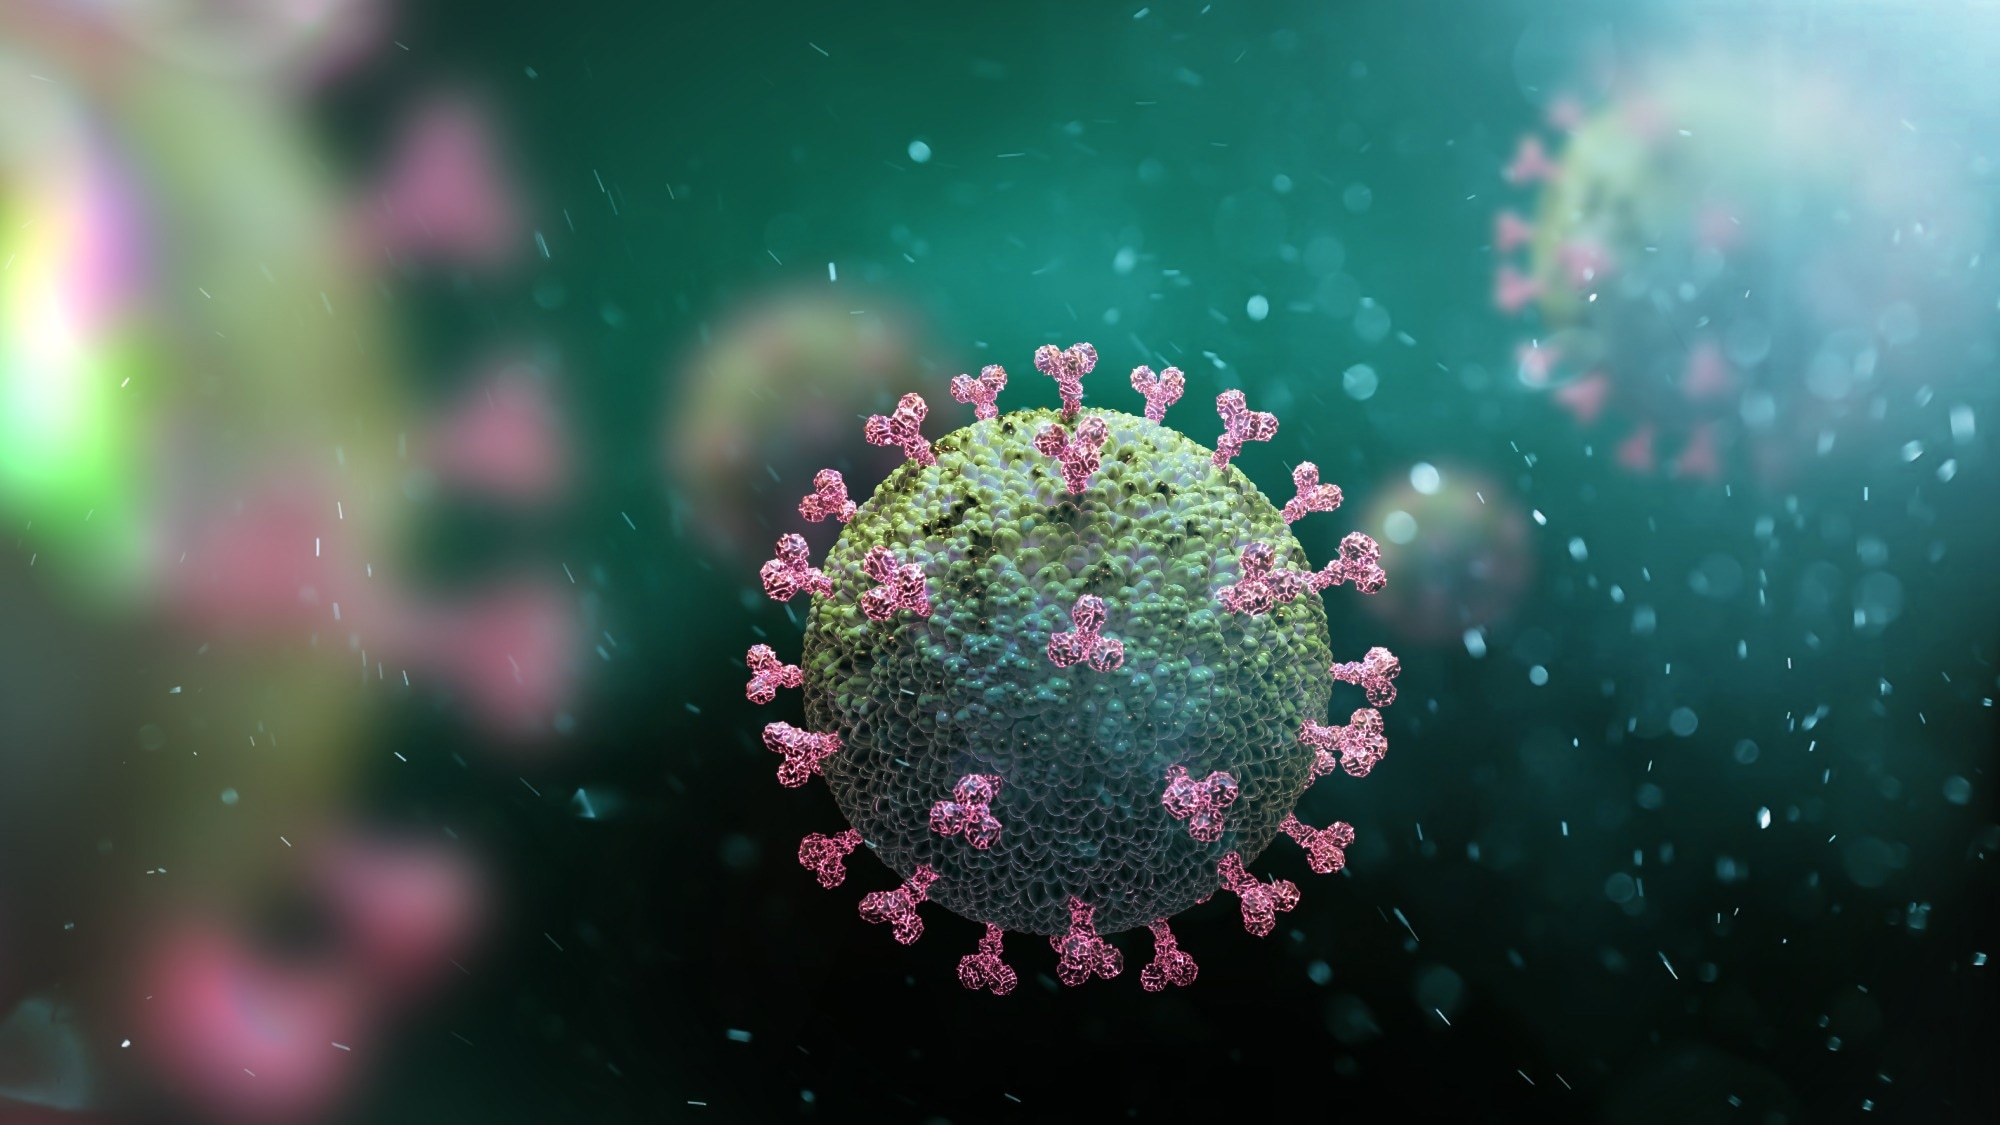 Study: Humoral immune response to omicron infection in long-term Wuhan-Hu-1-imprinted population. Image Credit: AndriiVodolazhskyi/Shutterstock.com